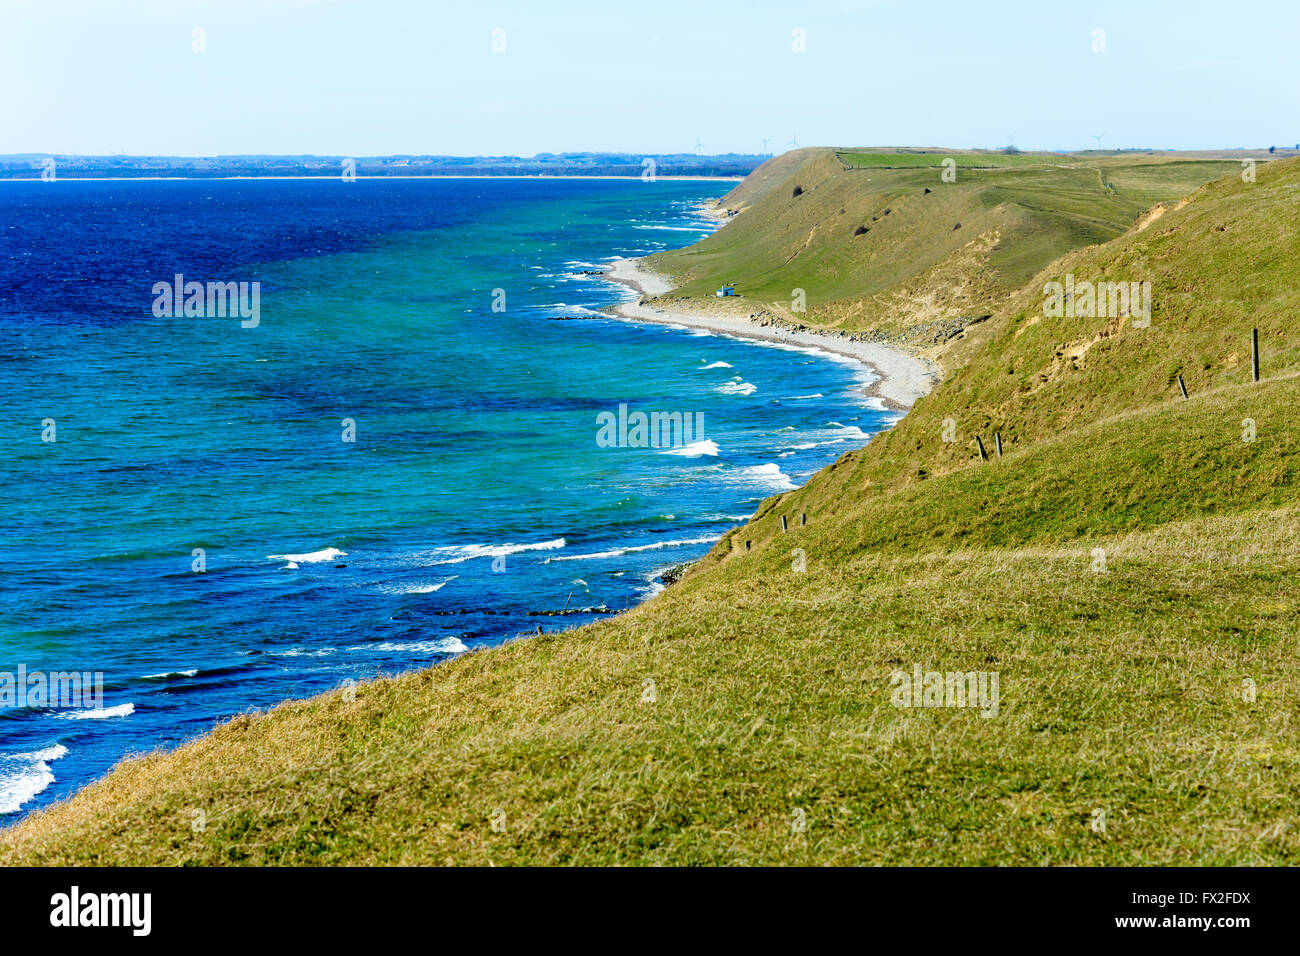 Grass covered coastal hills in spring. Weather is sunny and calm. Small house on the beach gives scale. Kaseberga coastline in S Stock Photo